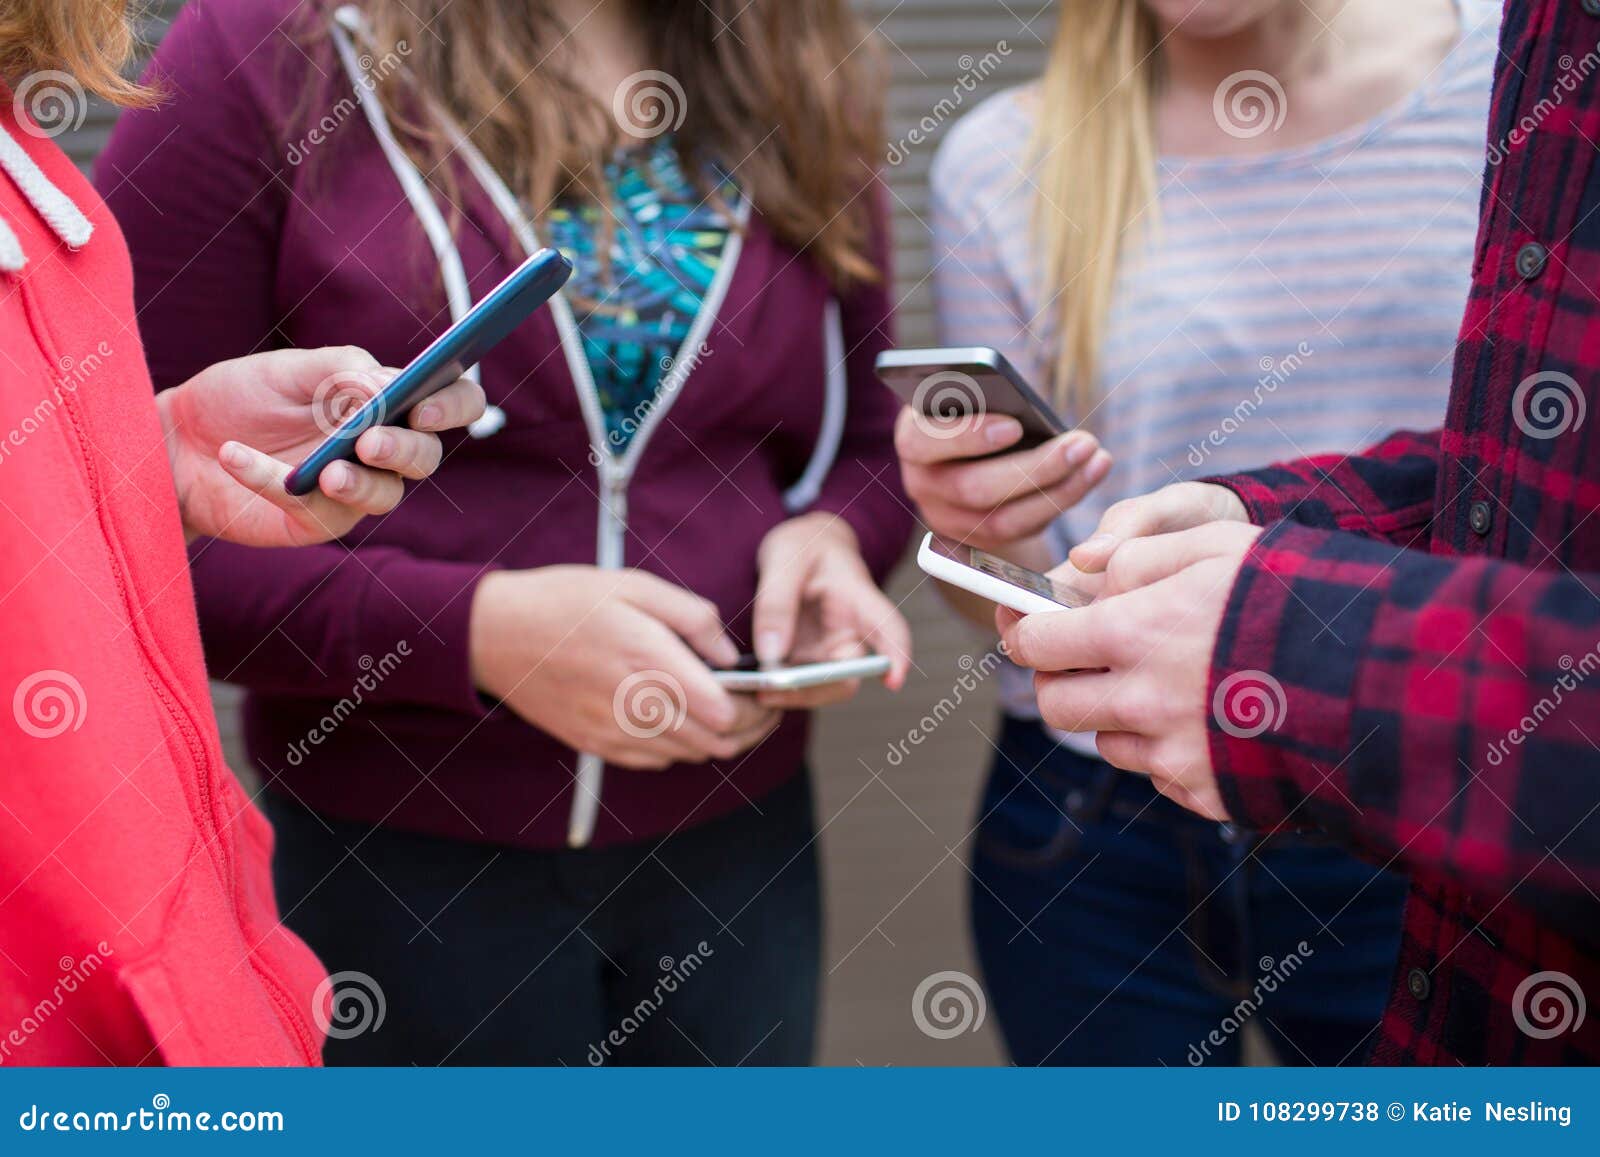 group of teenagers sharing text message on mobile phones